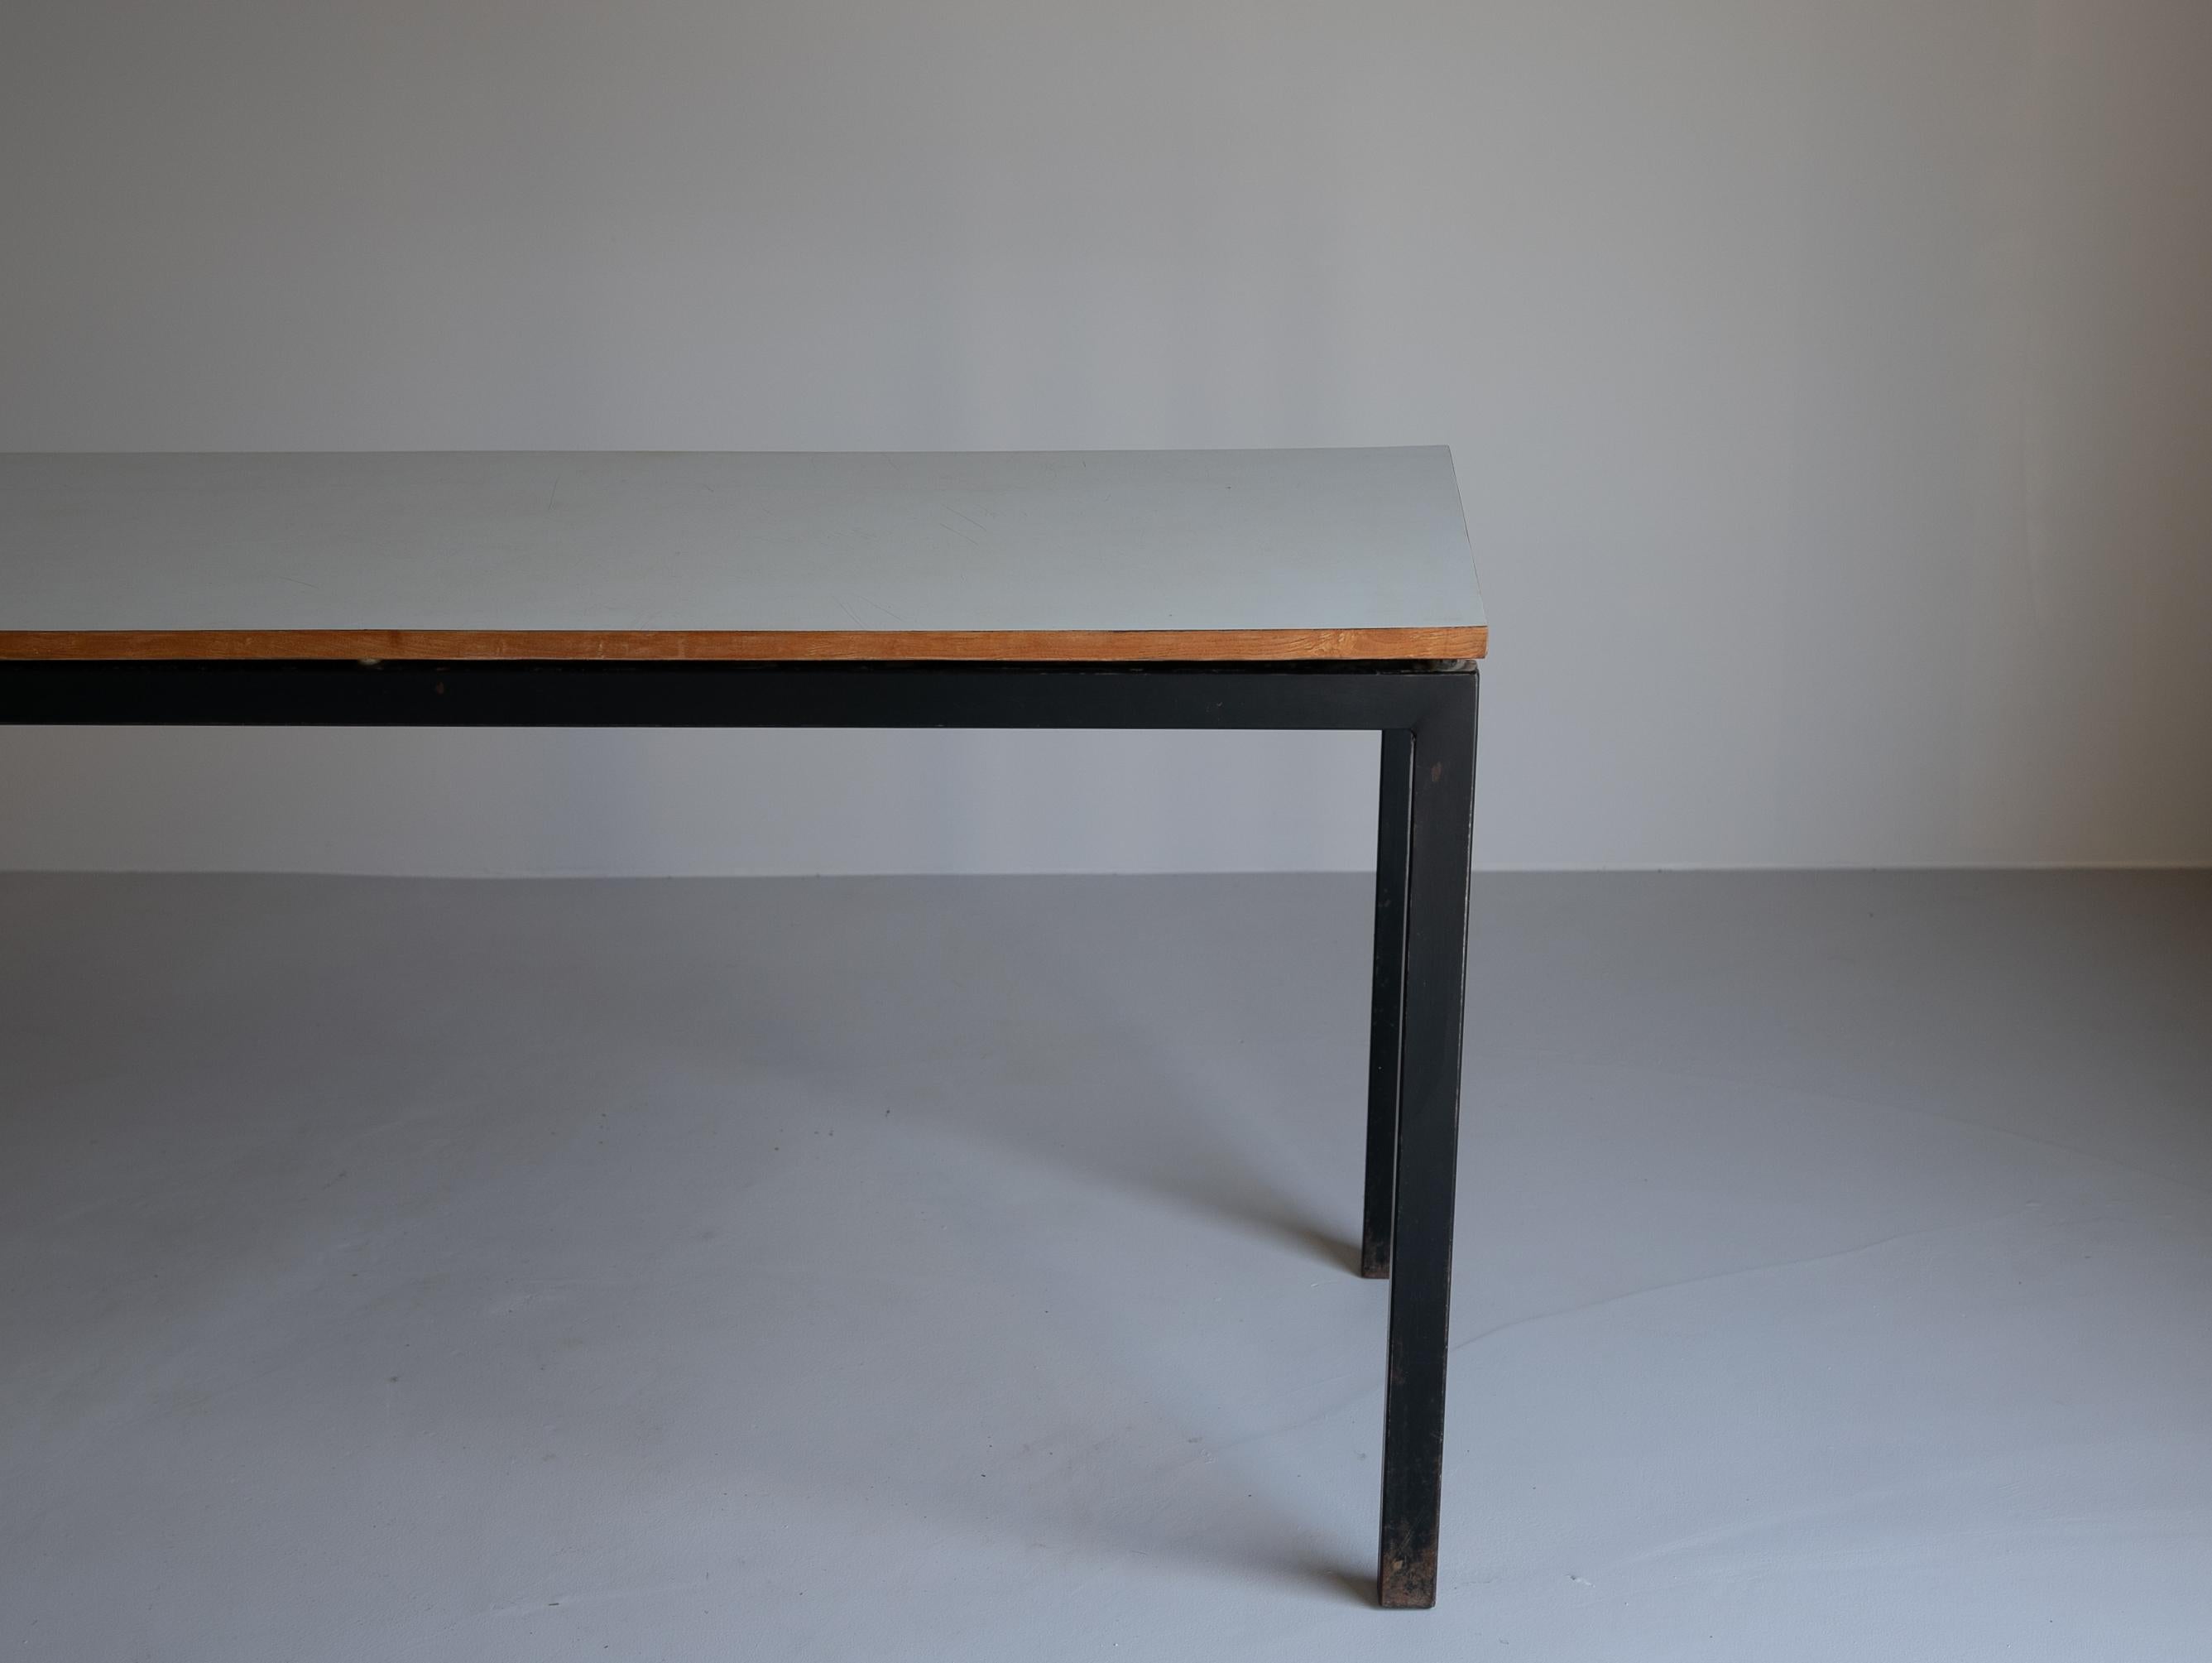 Mauritanian Desk from Cite Cansado by Charlotte Perriand